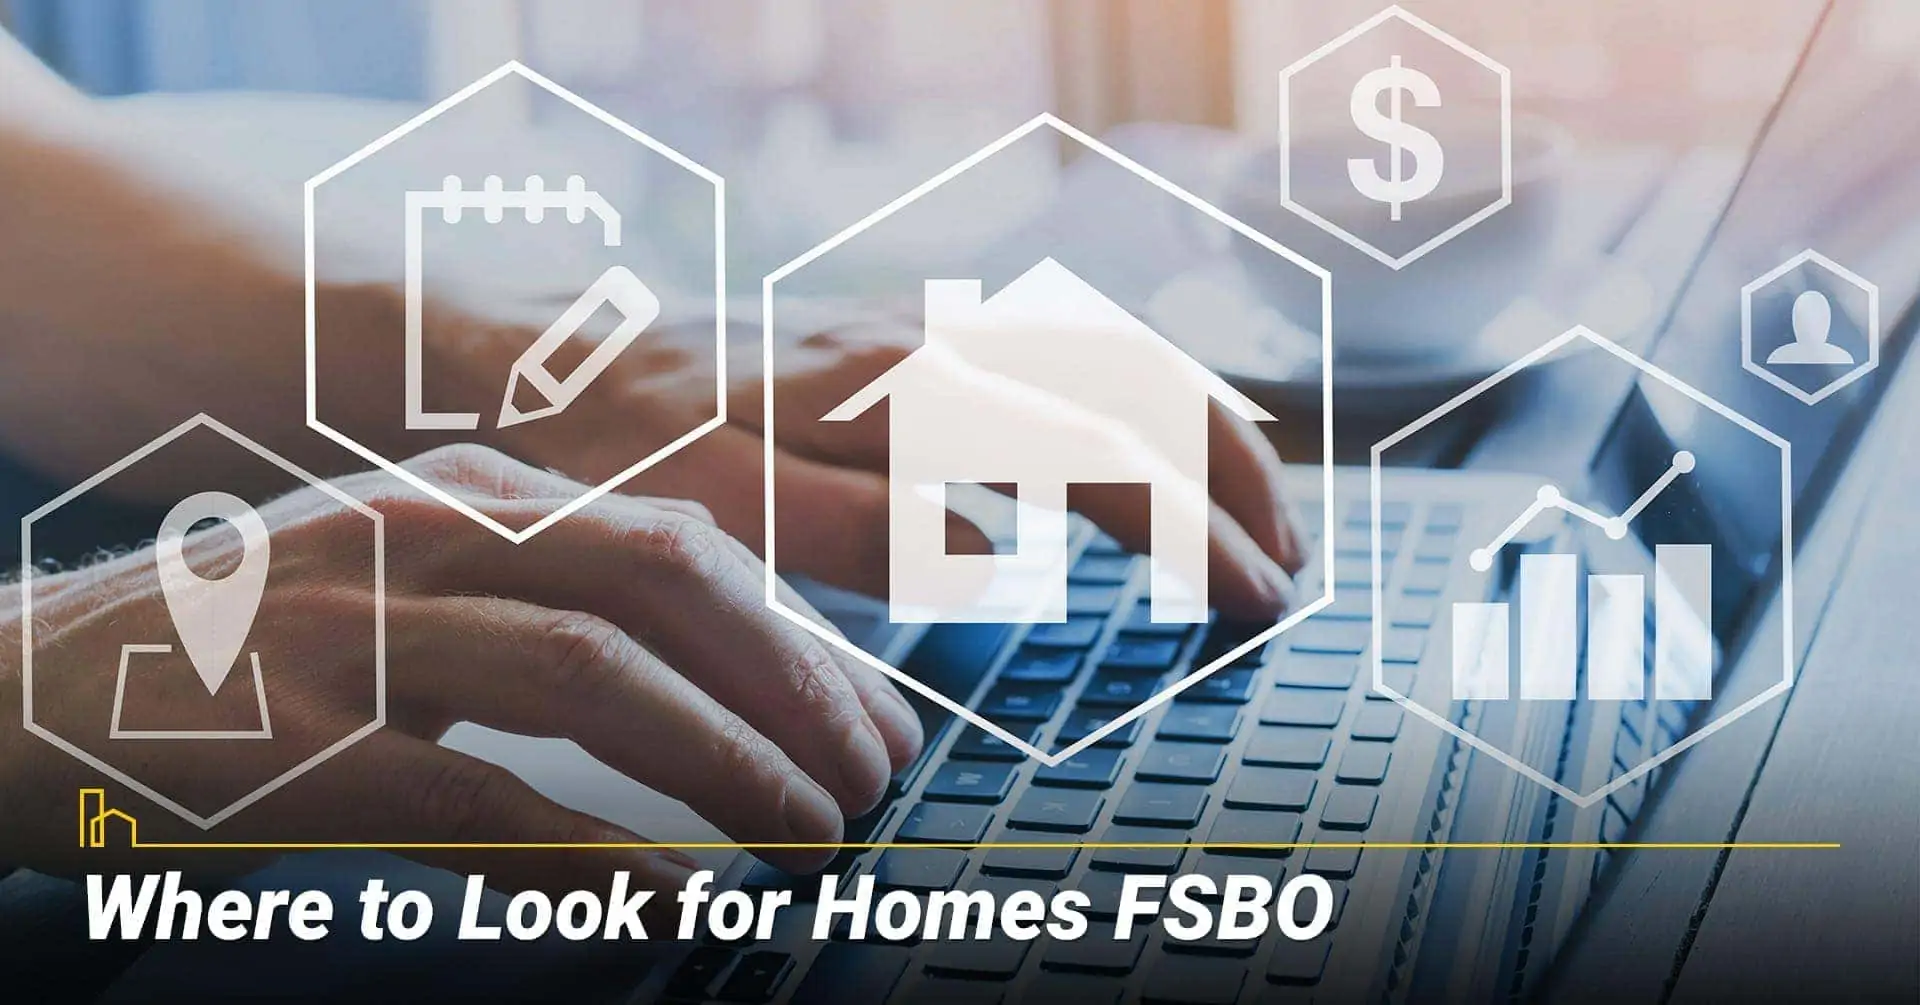 Where to Look for Homes FSBO, location for FSBO homes